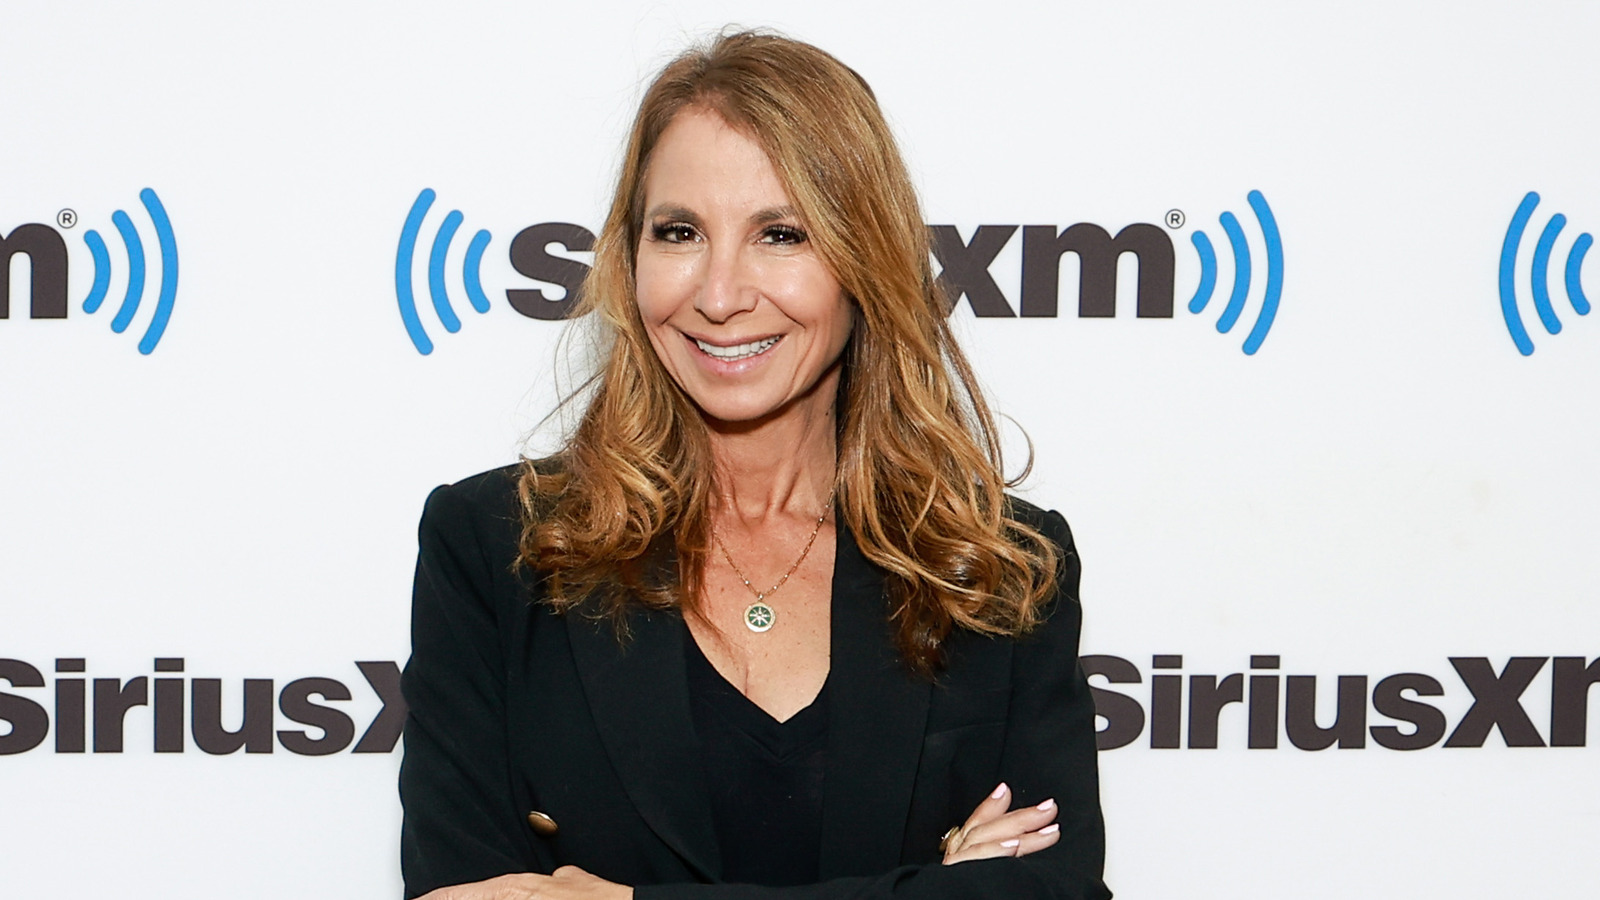 RHONY: What Jill Zarin Confessed About Her Daughter Ally's Biological Father